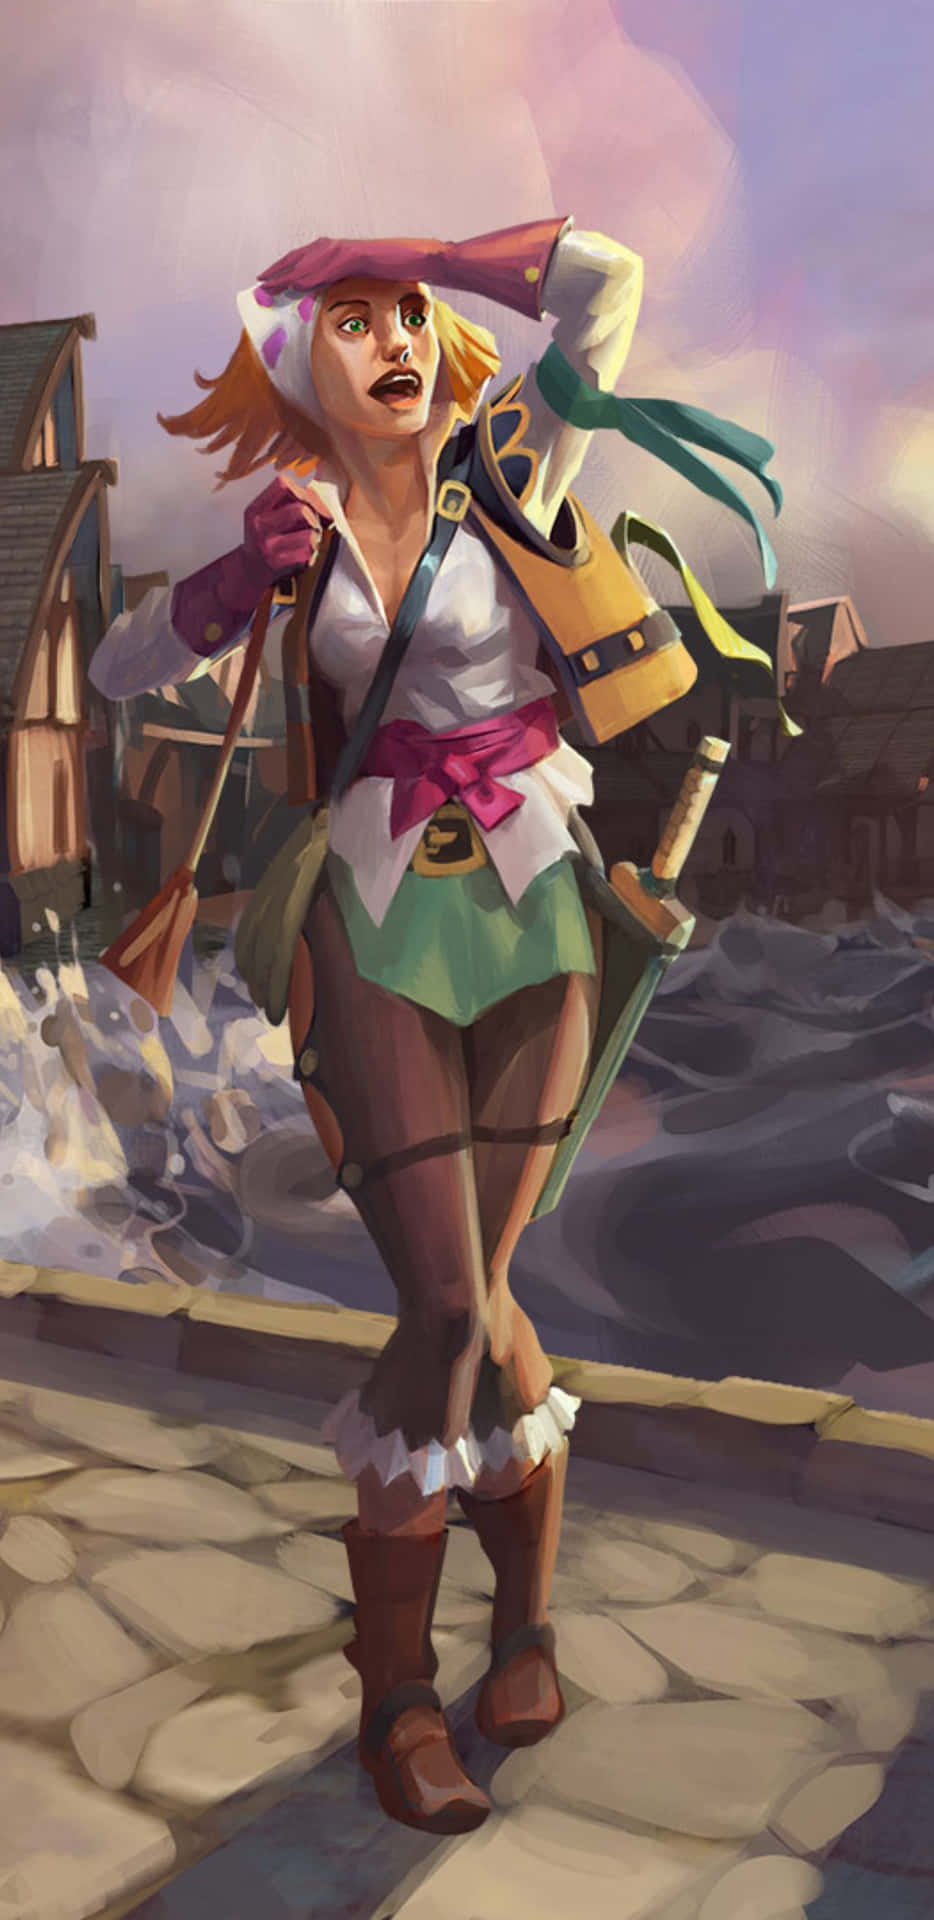 a girl in a pirate costume is standing on a street